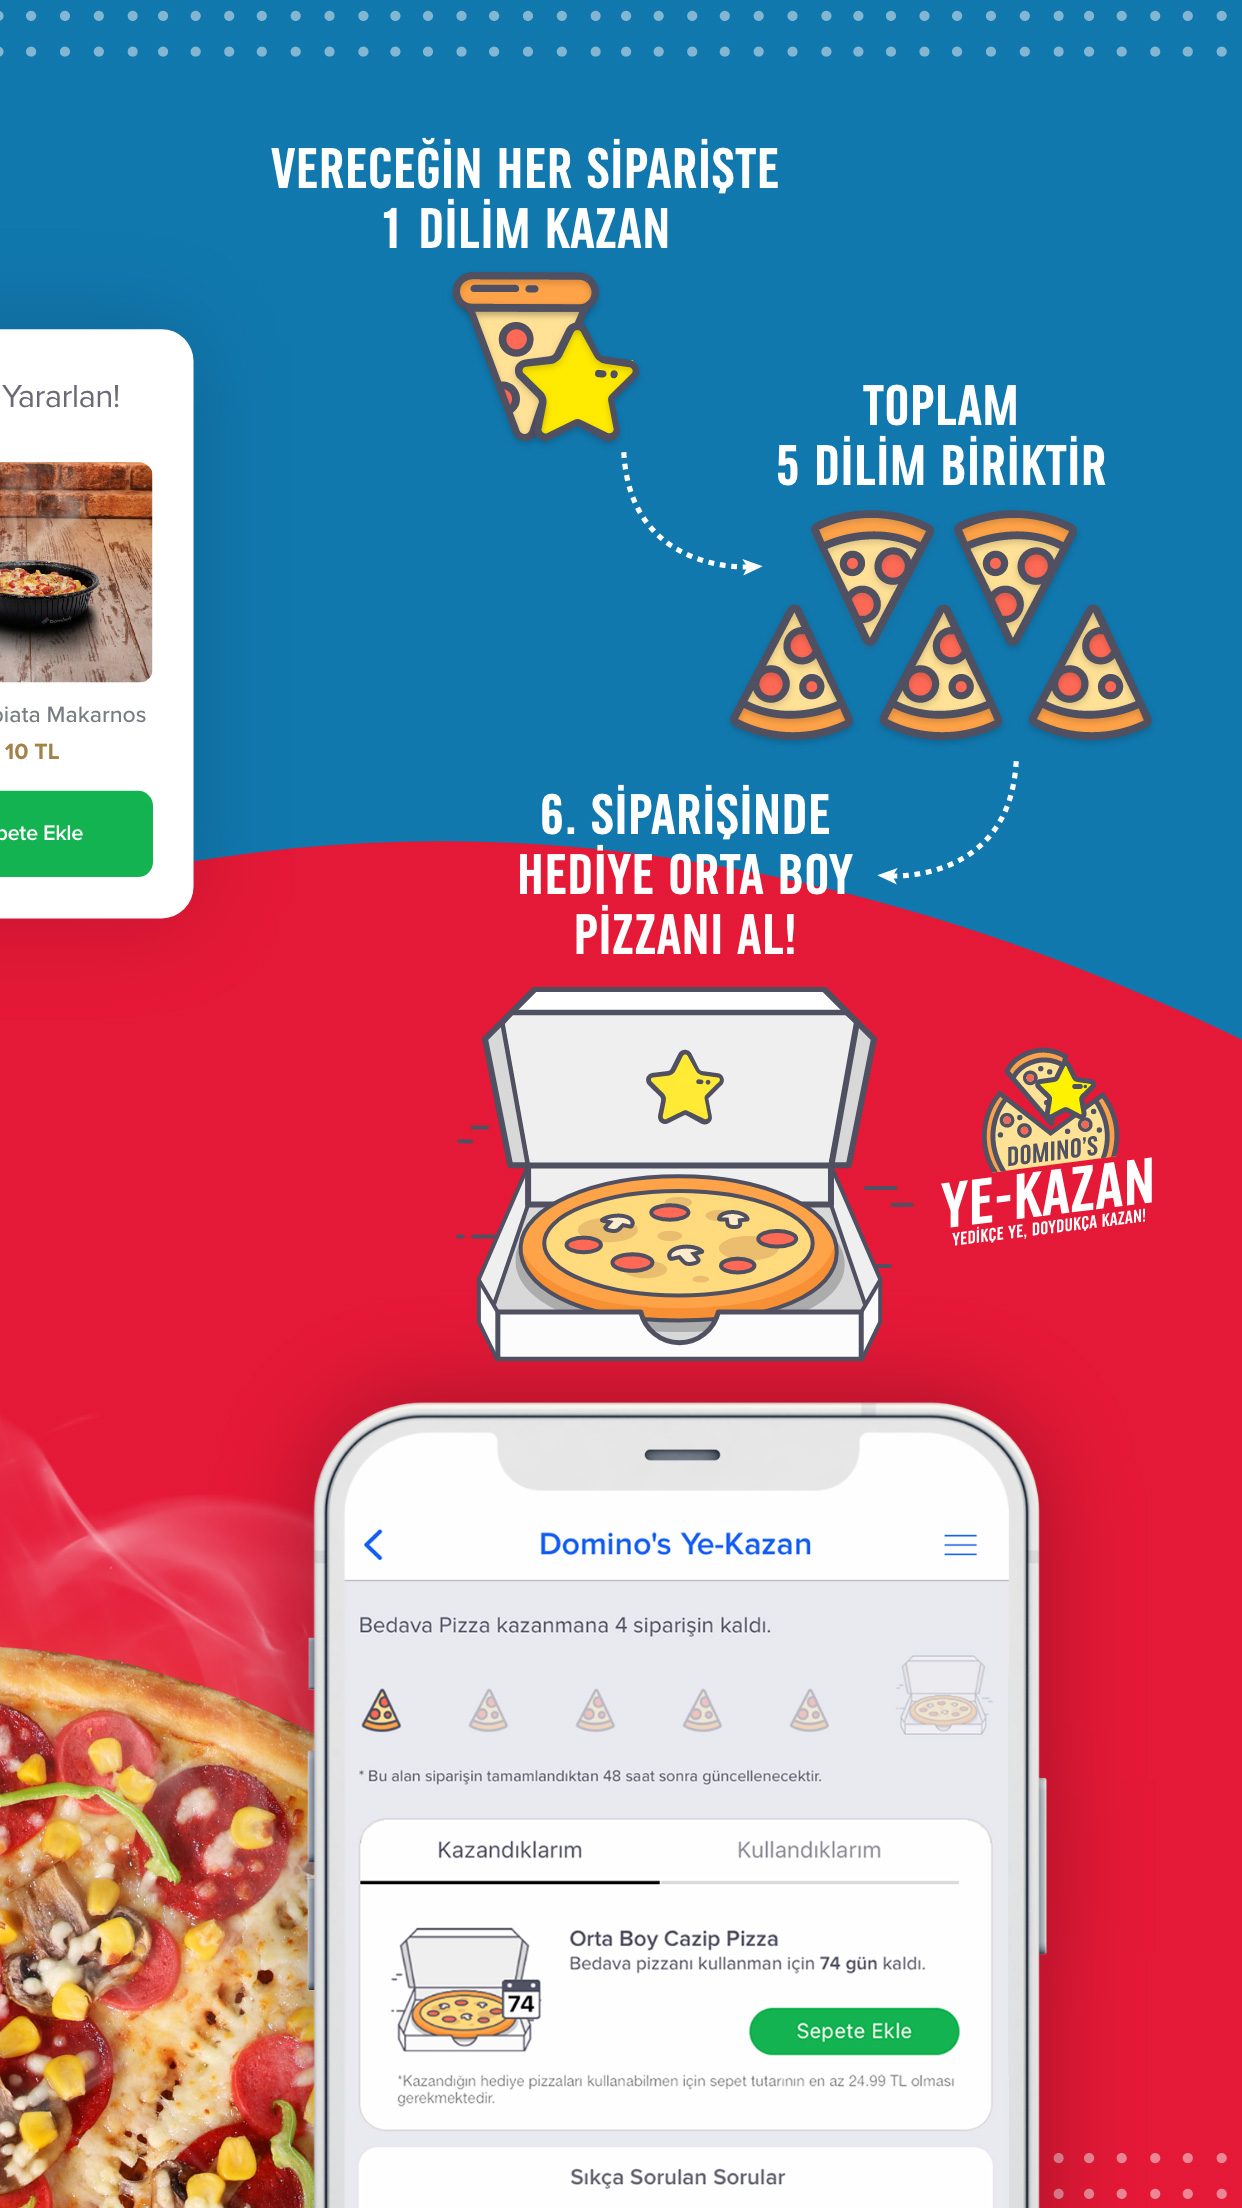 Domino's Pizza Turkey APK 7.0.2 for Android – Download Domino's Pizza  Turkey APK Latest Version from APKFab.com